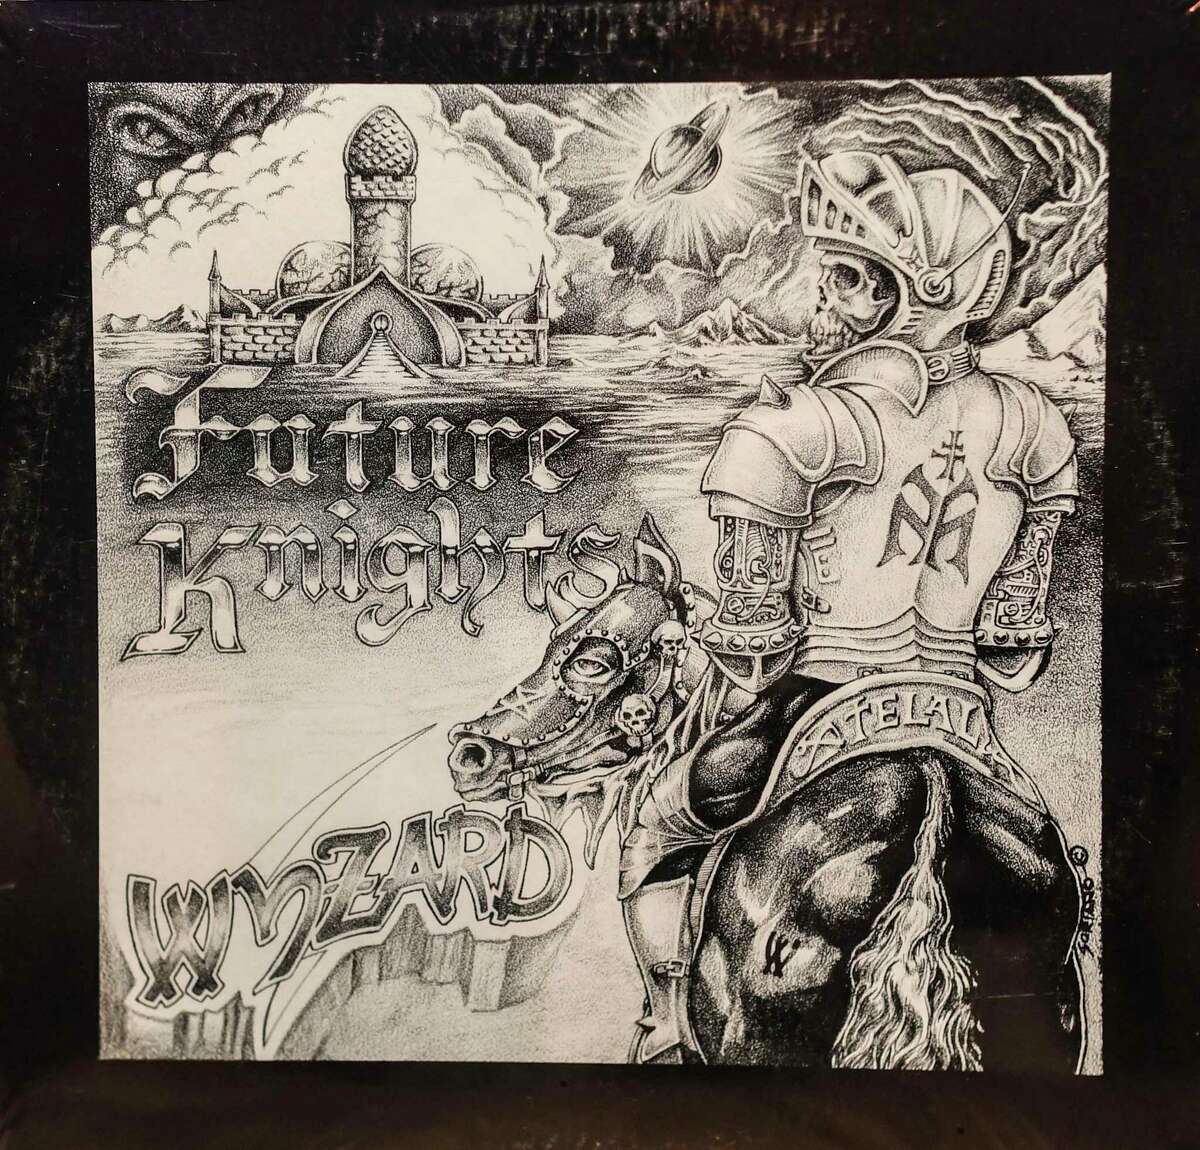 The album "Future Knights" by the San Antonio metal band Wyzard was recorded in 1983 in San Antonio and released in 1984. Only 100 copies were pressed.